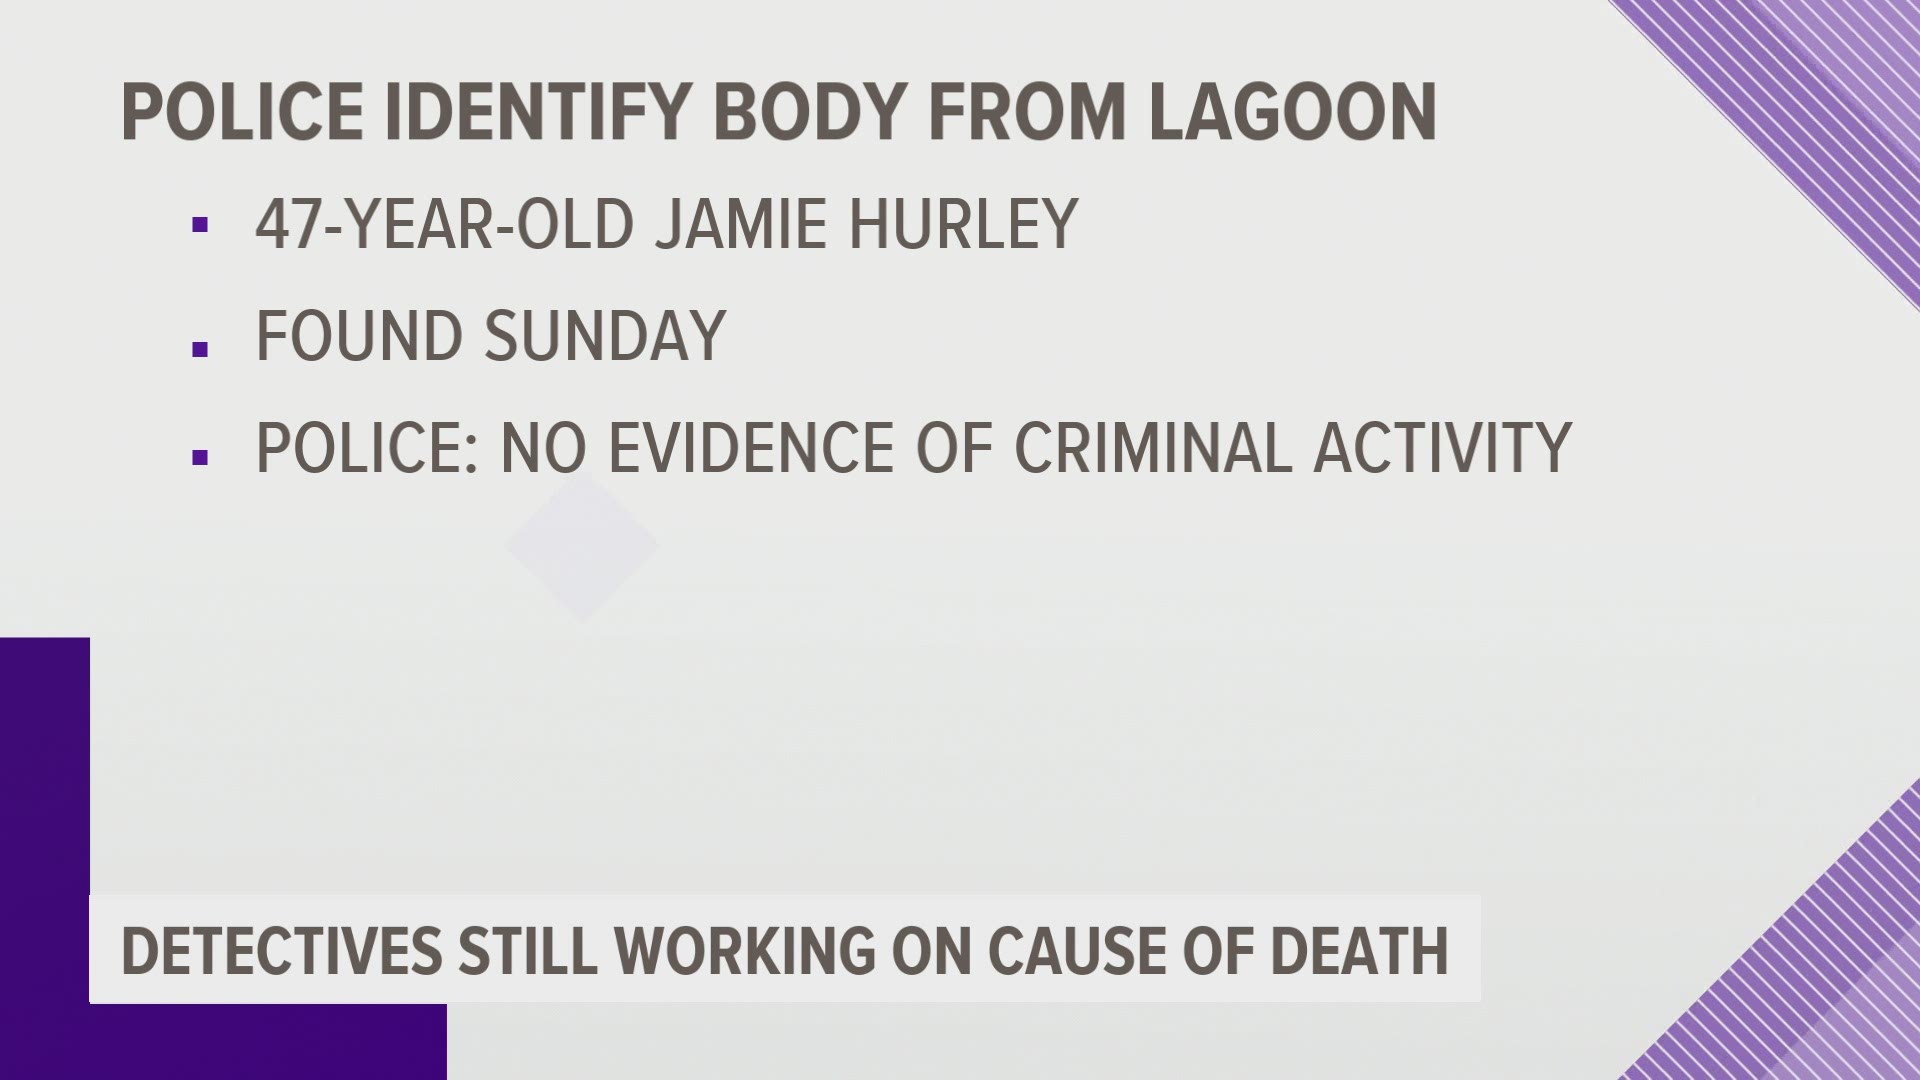 A release from the Des Moines Police Department says there is no indication or evidence of criminal activity around the death of 47-year-old Jamie Alan Hurley.